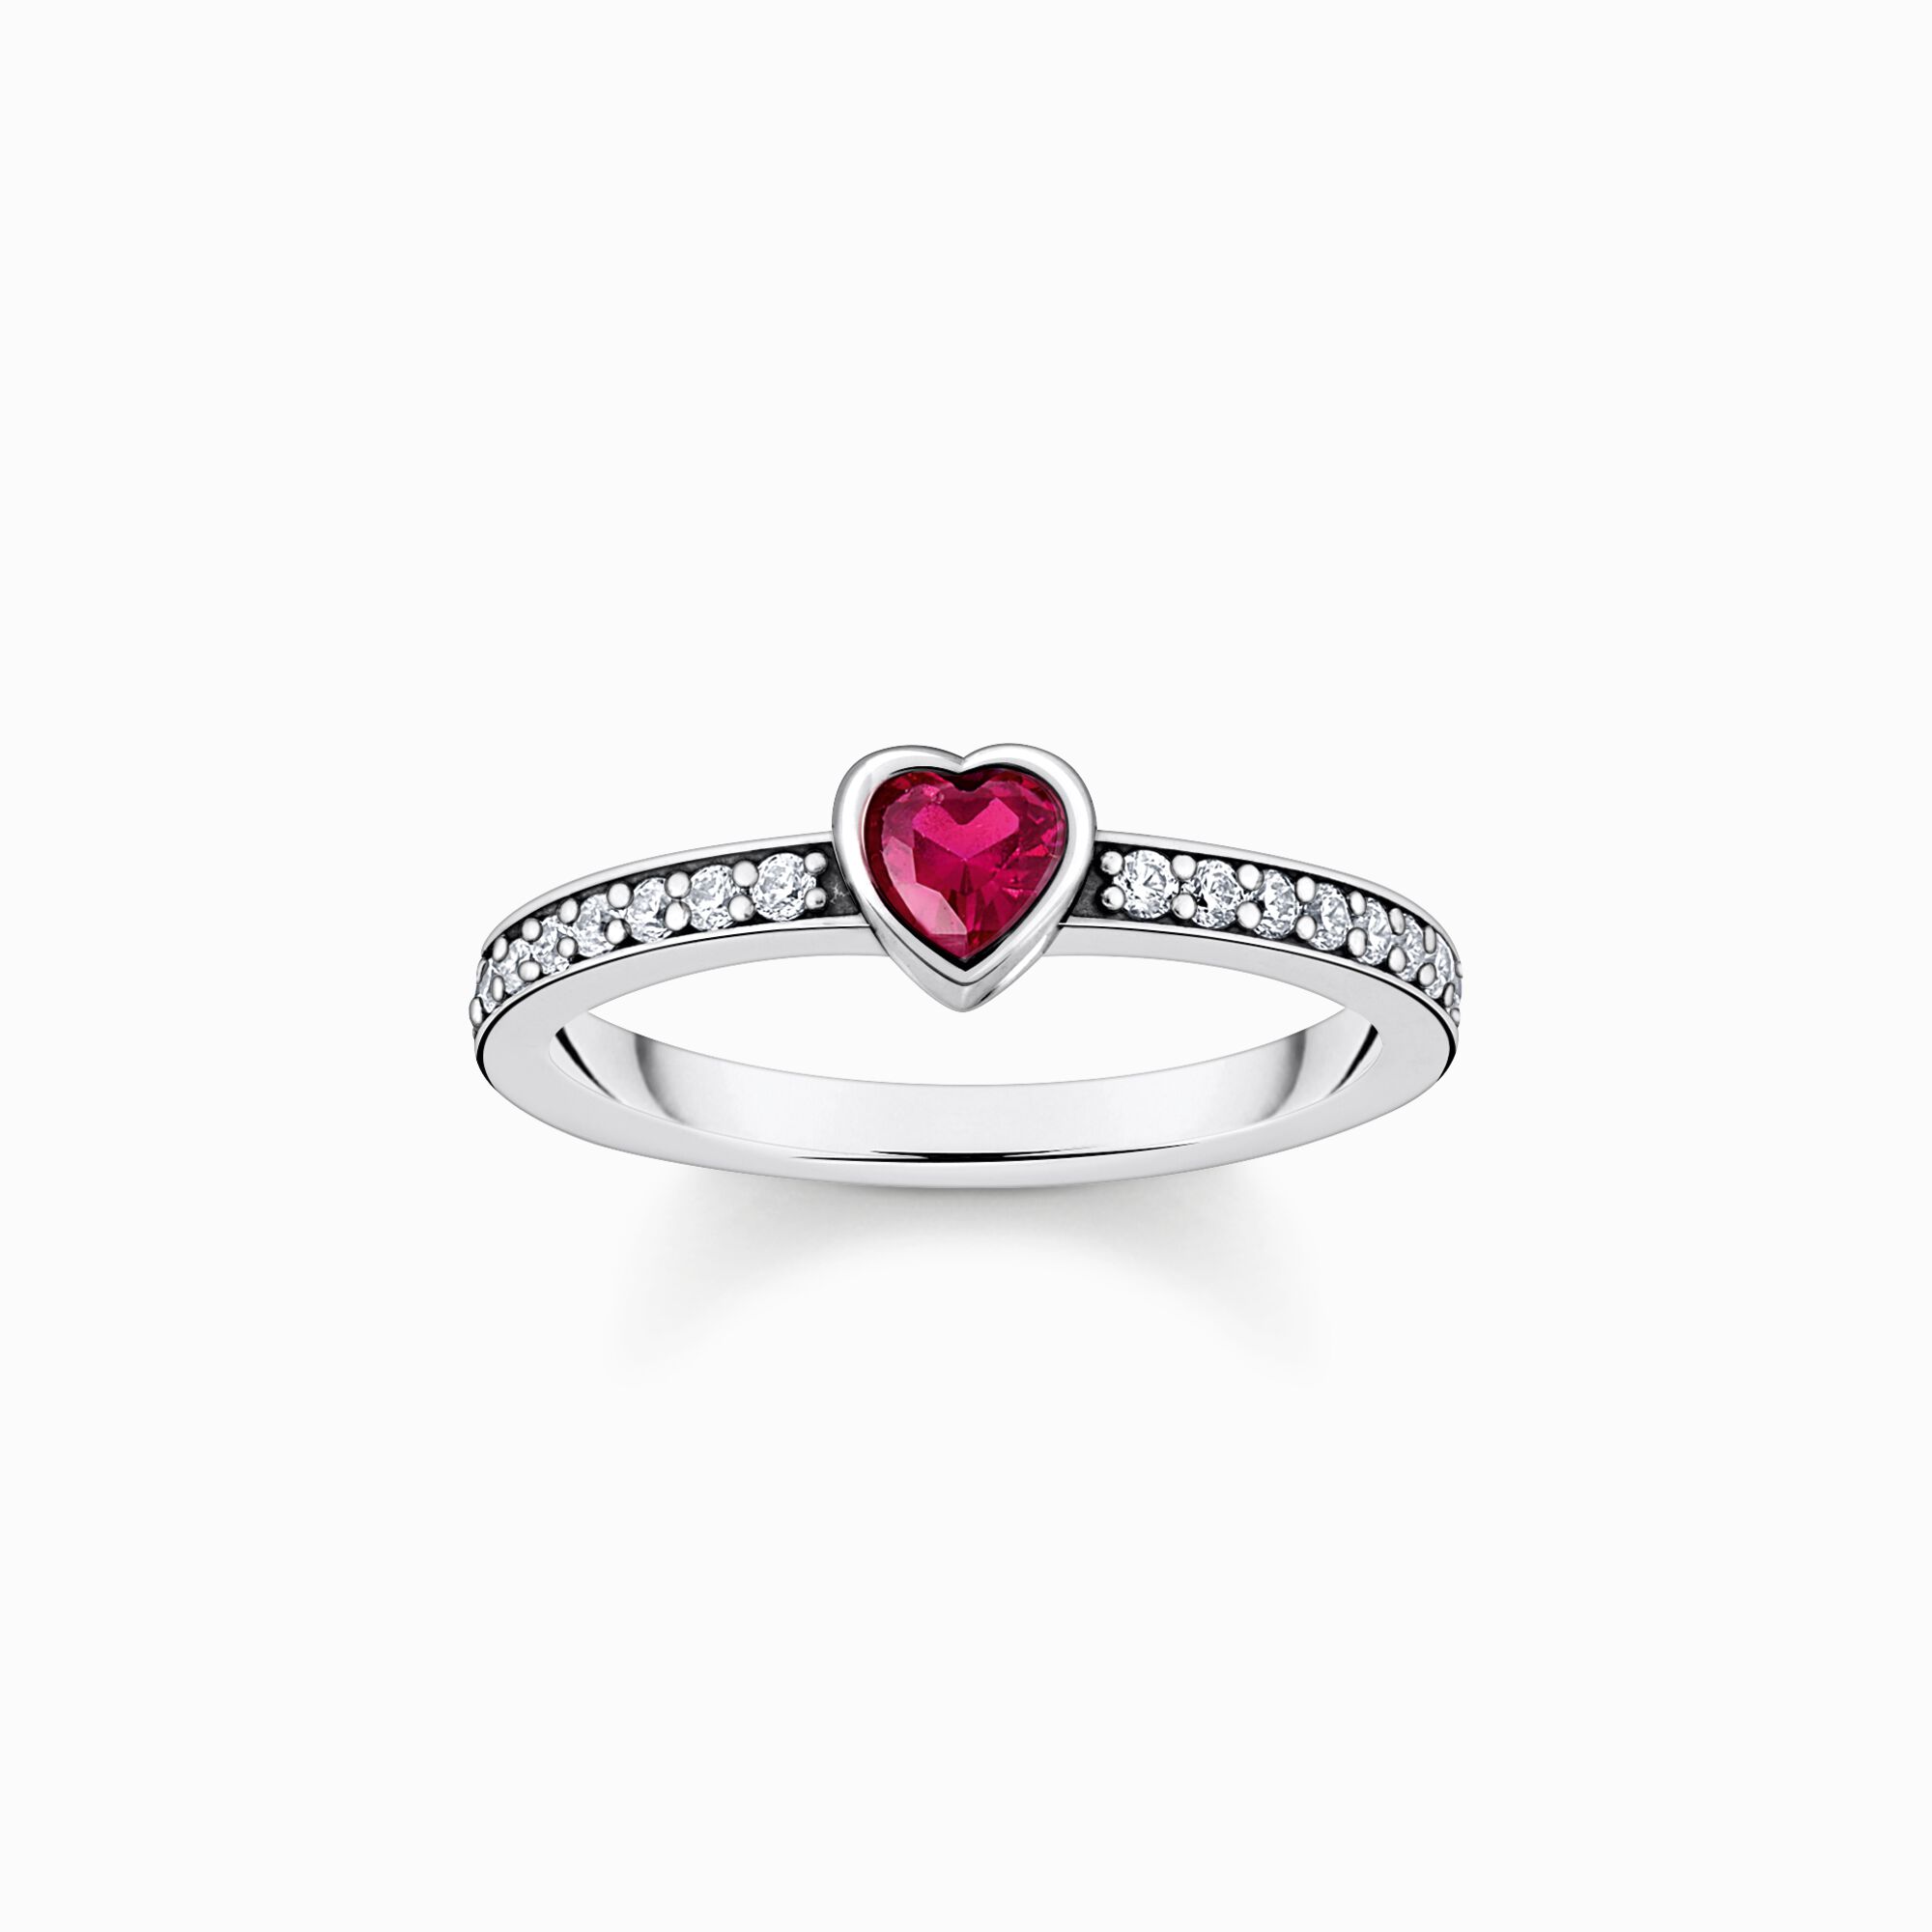 Silver solitaire ring with red heart-shaped stone from the  collection in the THOMAS SABO online store